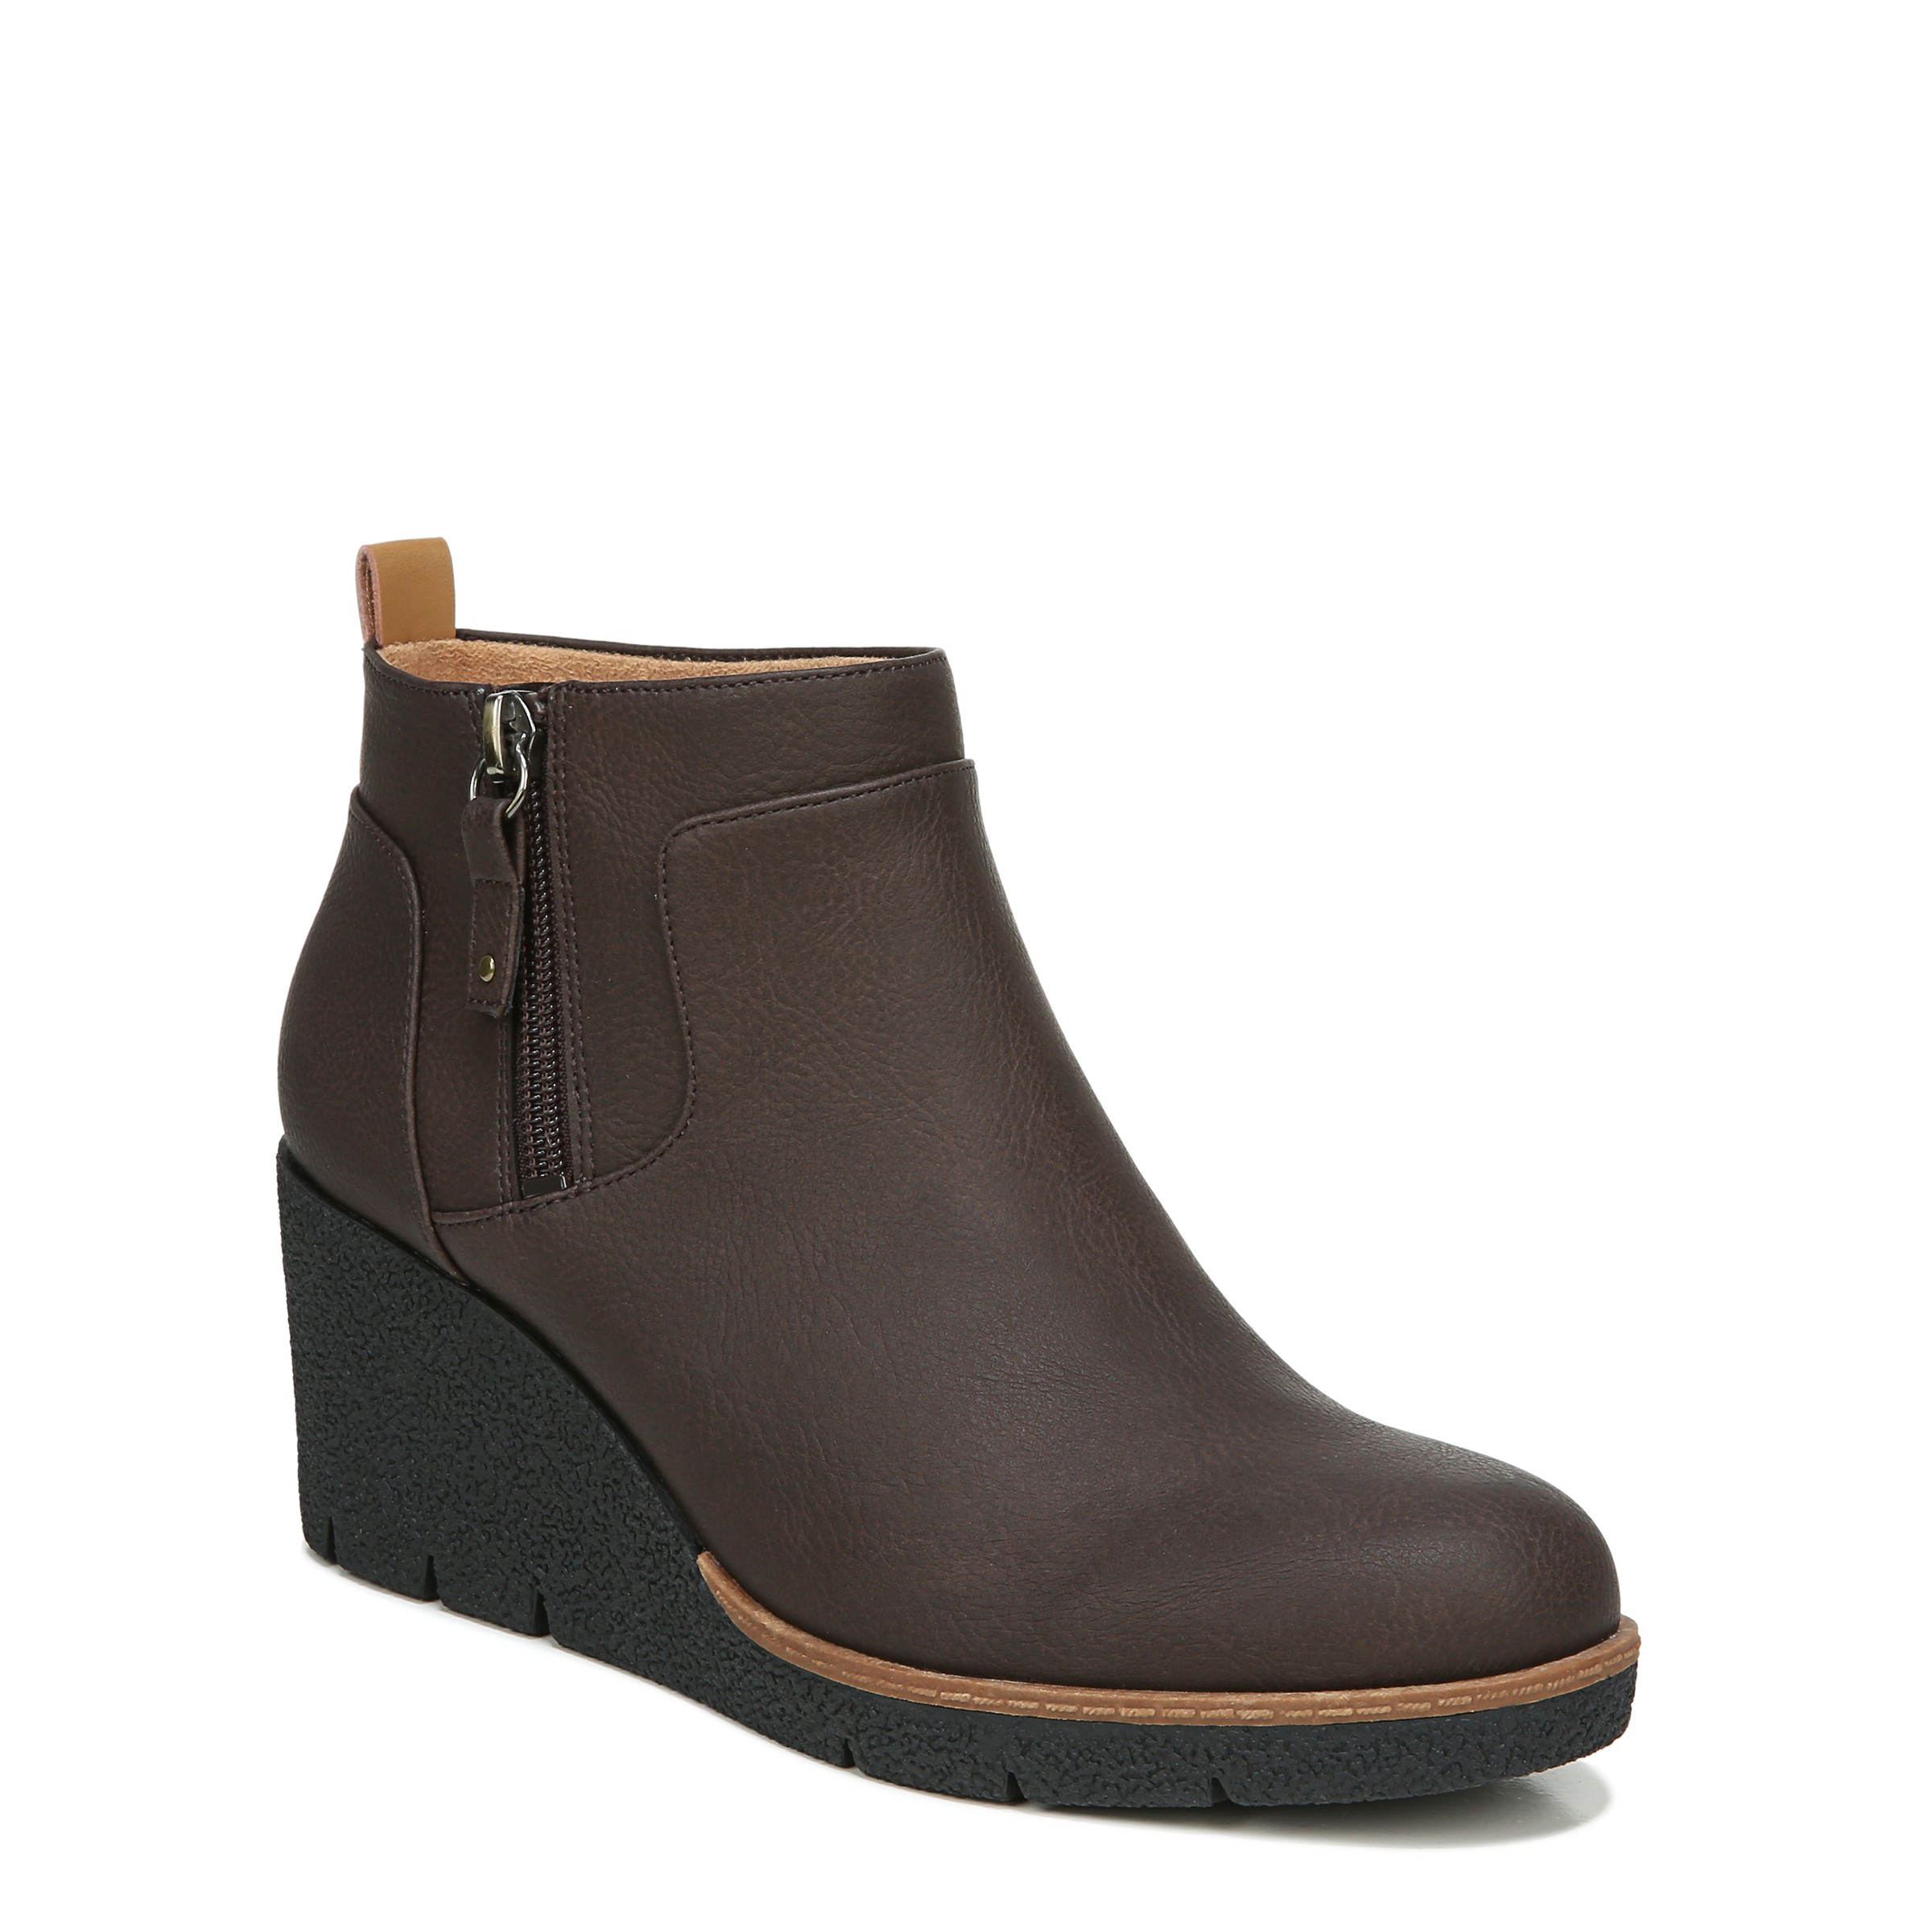 Dr. Scholls Shoes Womens Bianca Ankle Boot - image 1 of 7